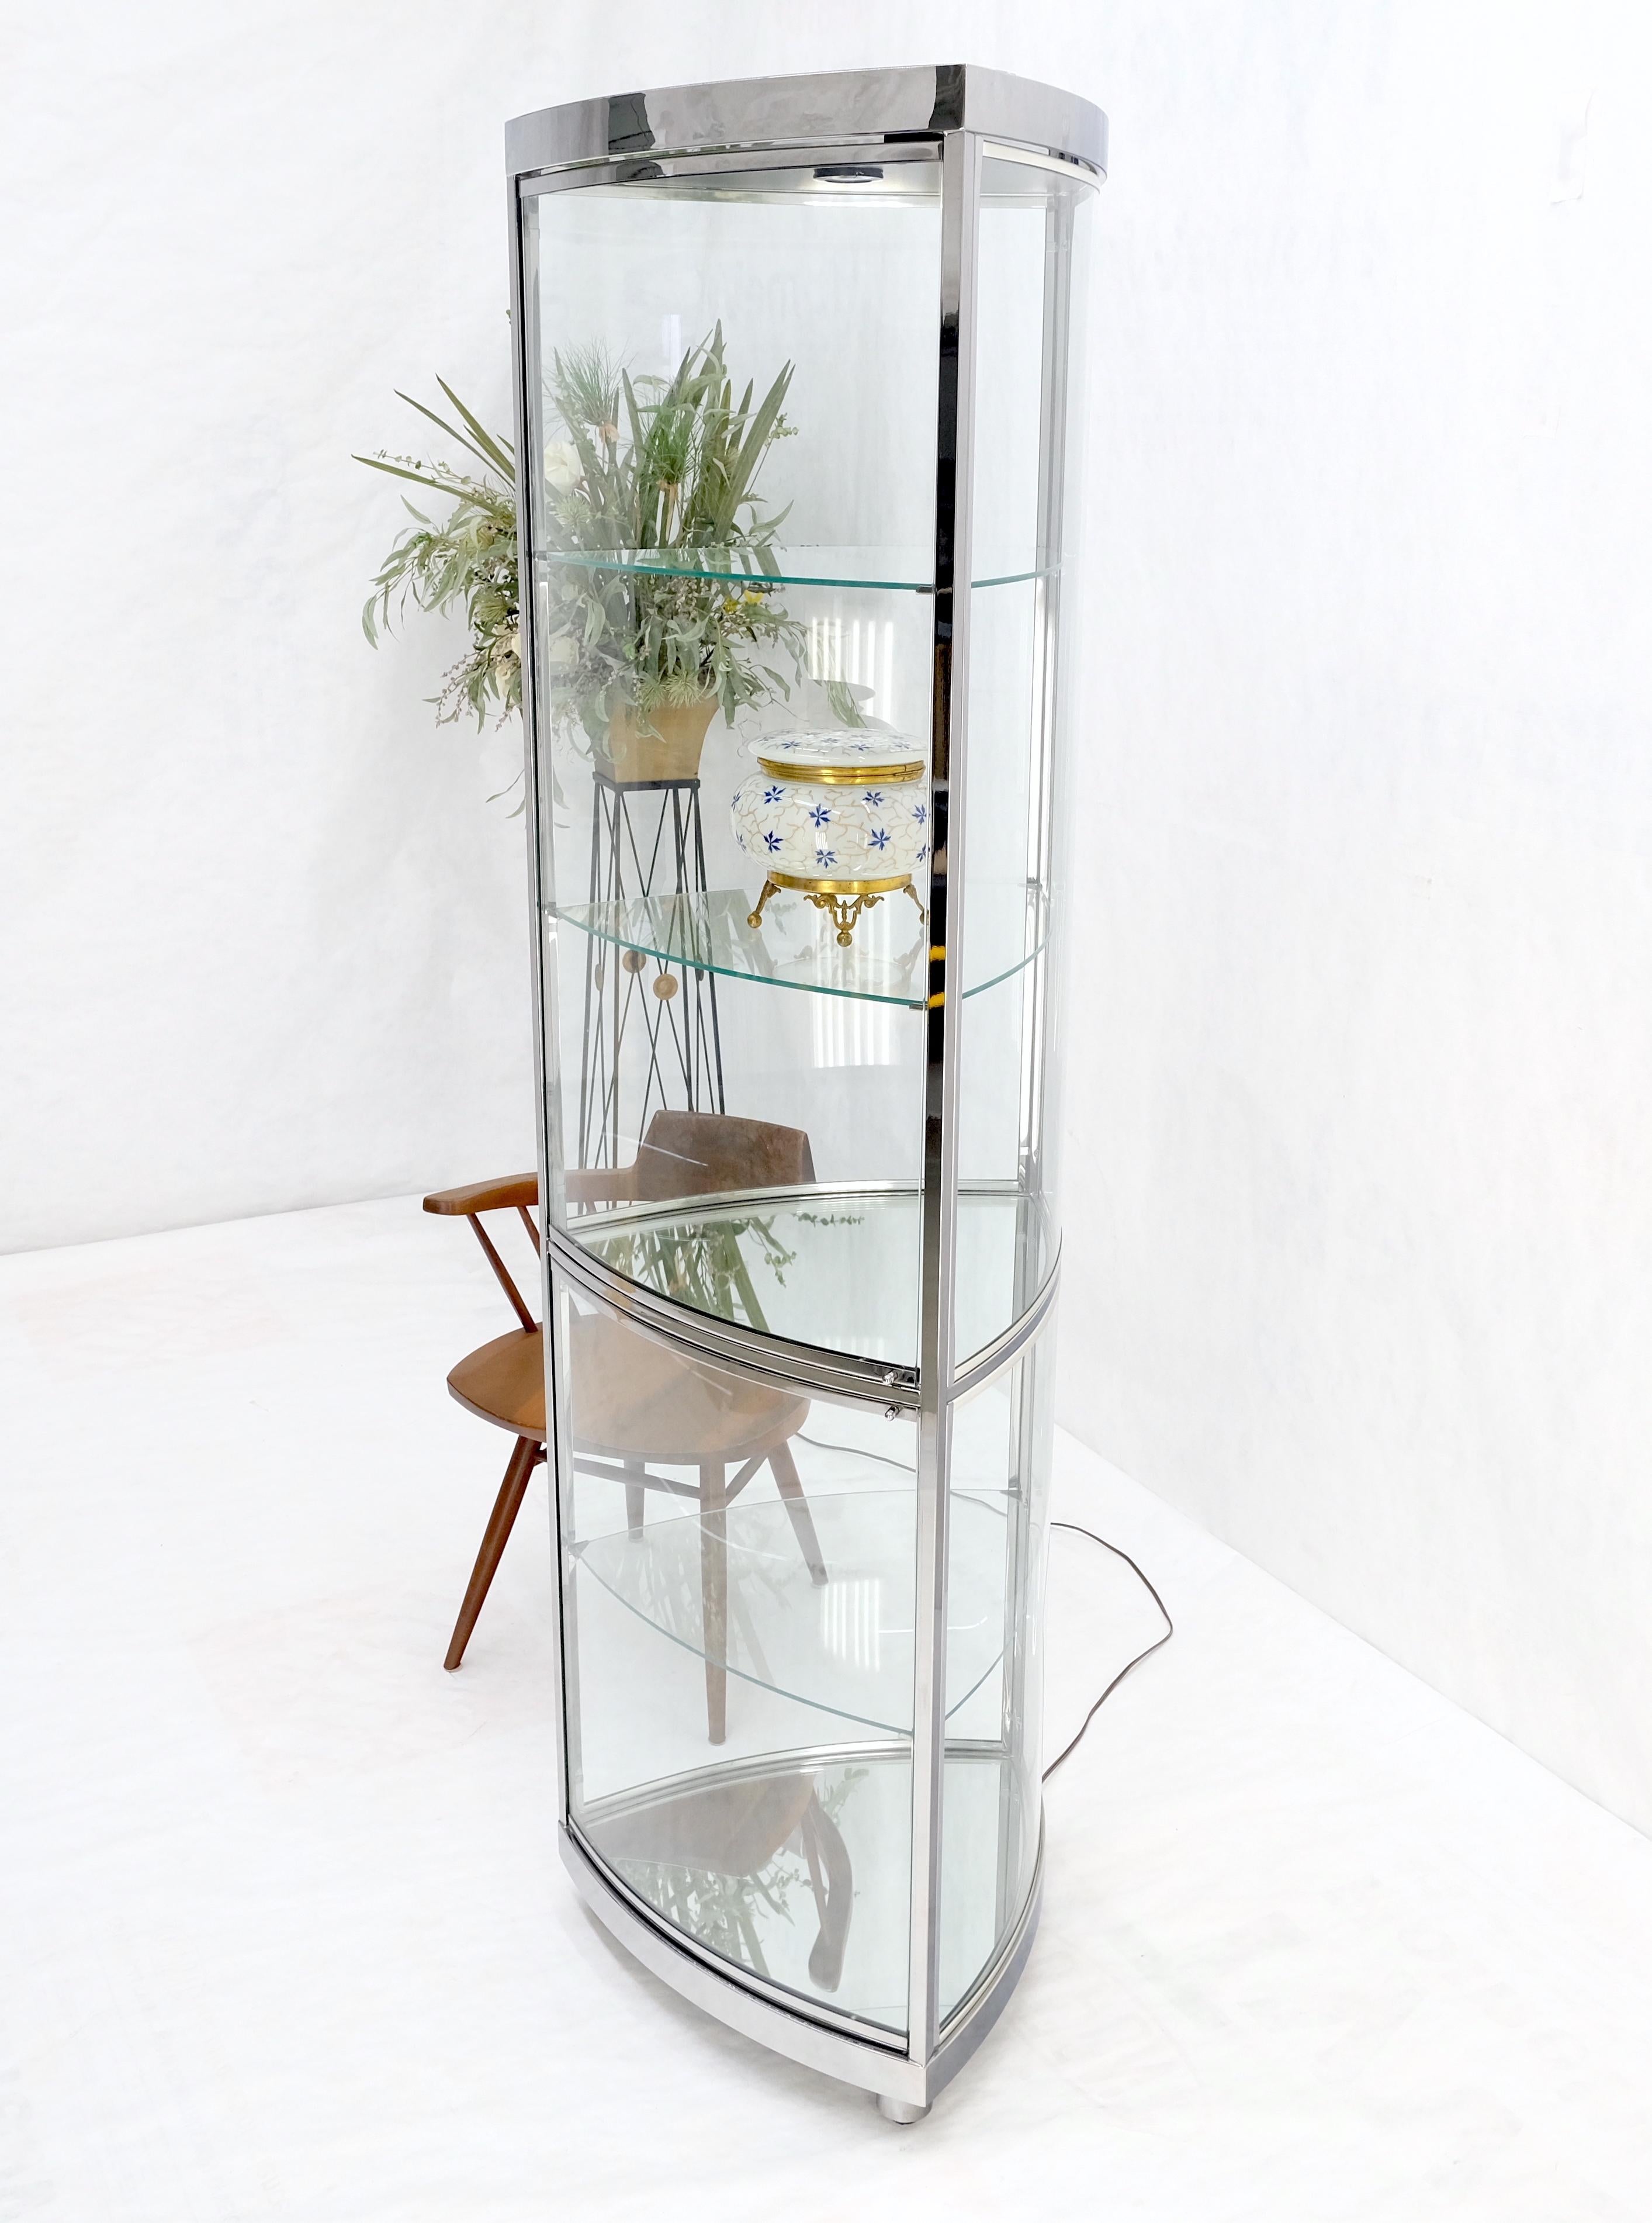 Rounded Triangle Shape Bowed Glass & Chrome Shelves Display Case Vitrine MINT! In Good Condition For Sale In Rockaway, NJ